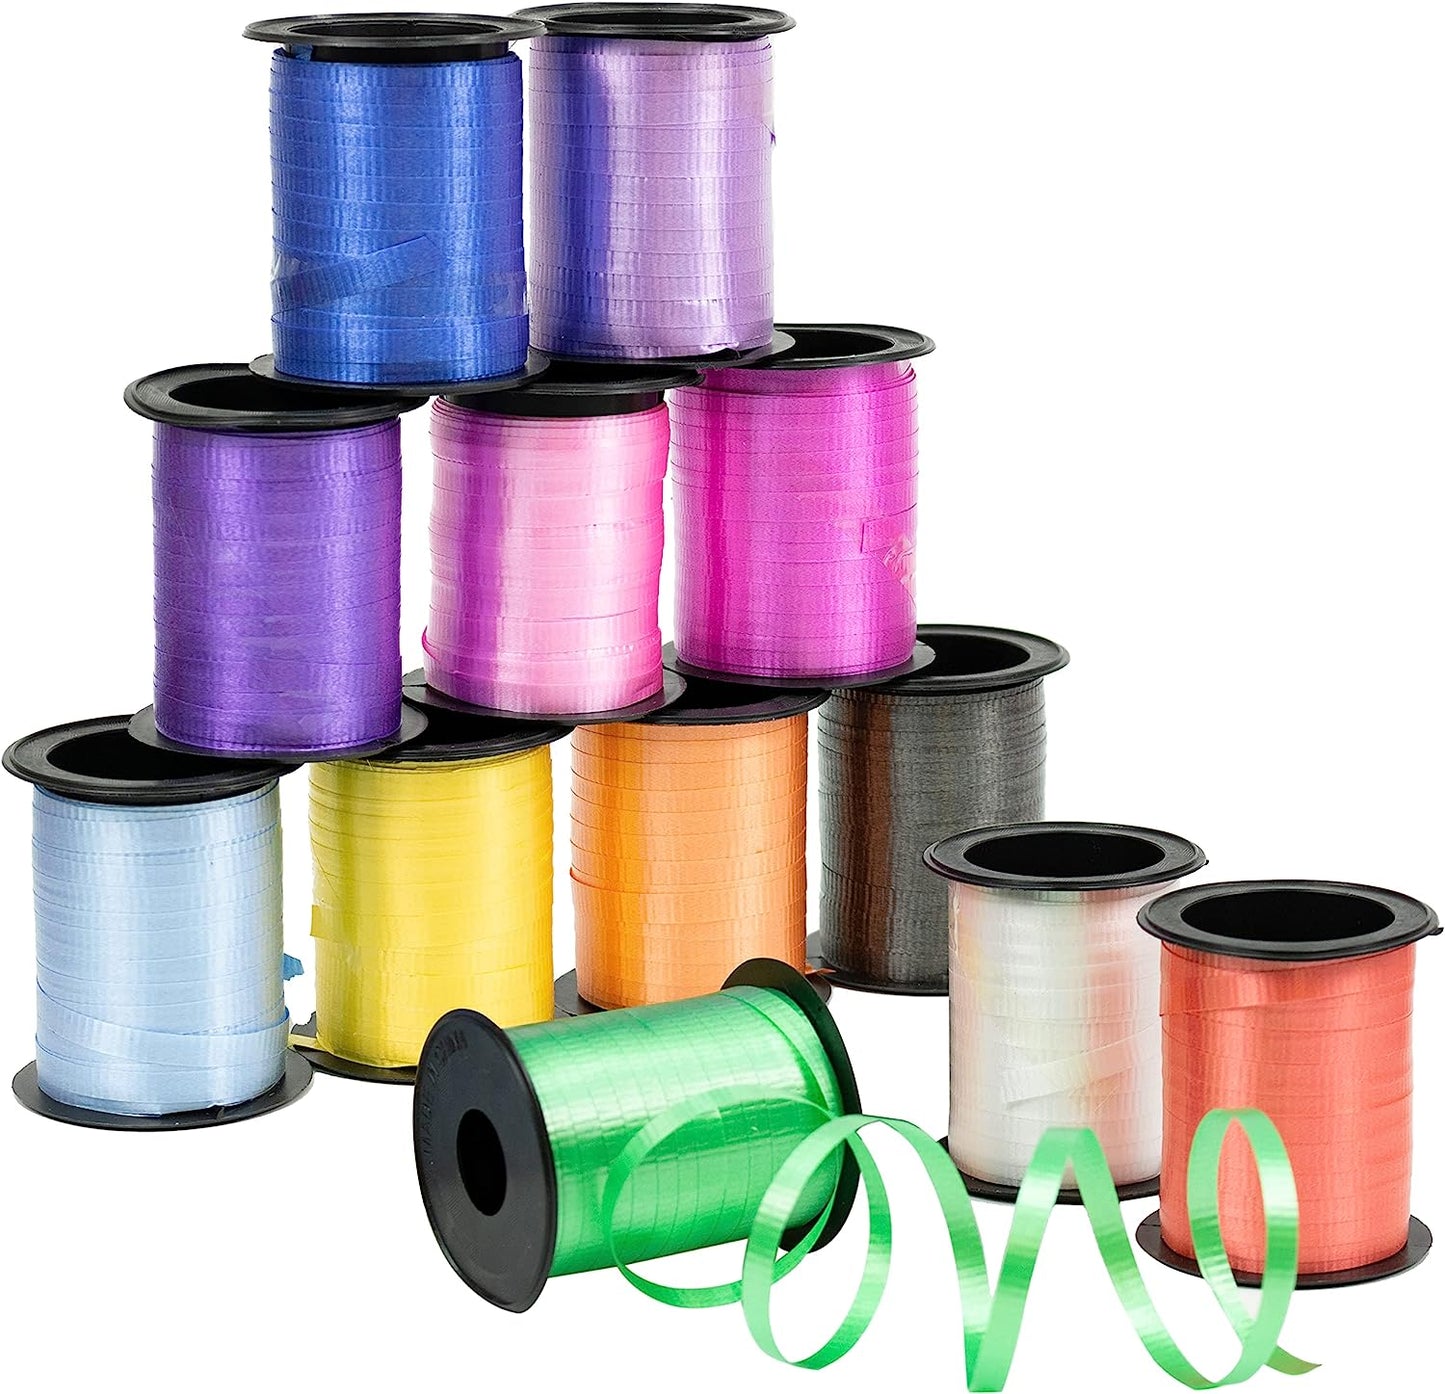 GIFTEXPRESS Curling Ribbon Balloon String Assortment (Pack of 12)